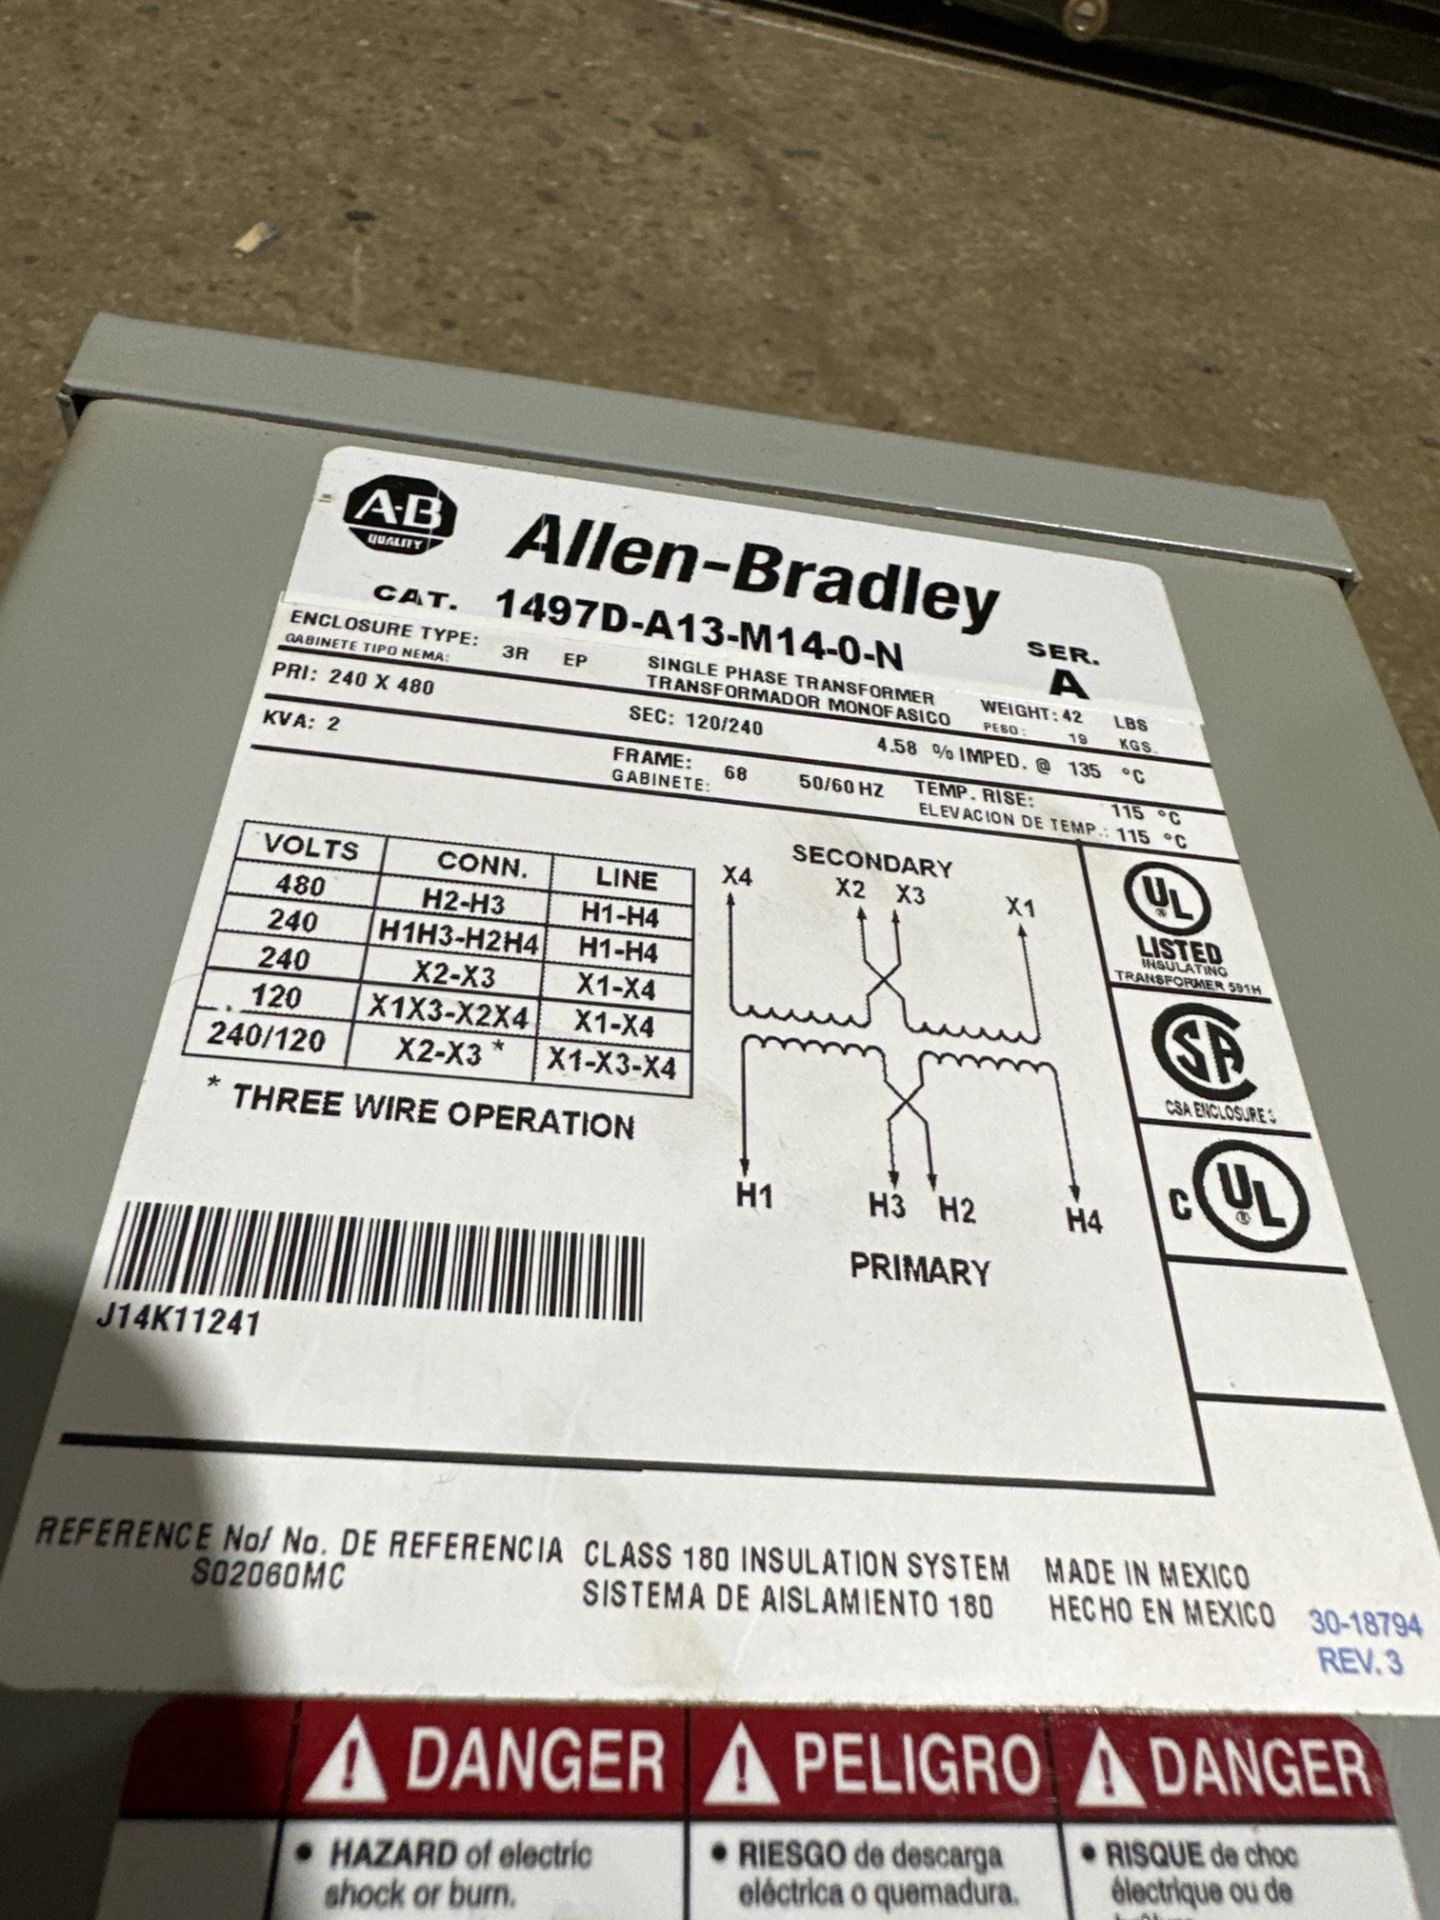 NEW IN BOX ALLEN BRADLEY 1479D-A13-M14-0-N TRANSFORMER 240/480 PRIMARY 120/240 SECONDARY 2 KVA - Image 2 of 6